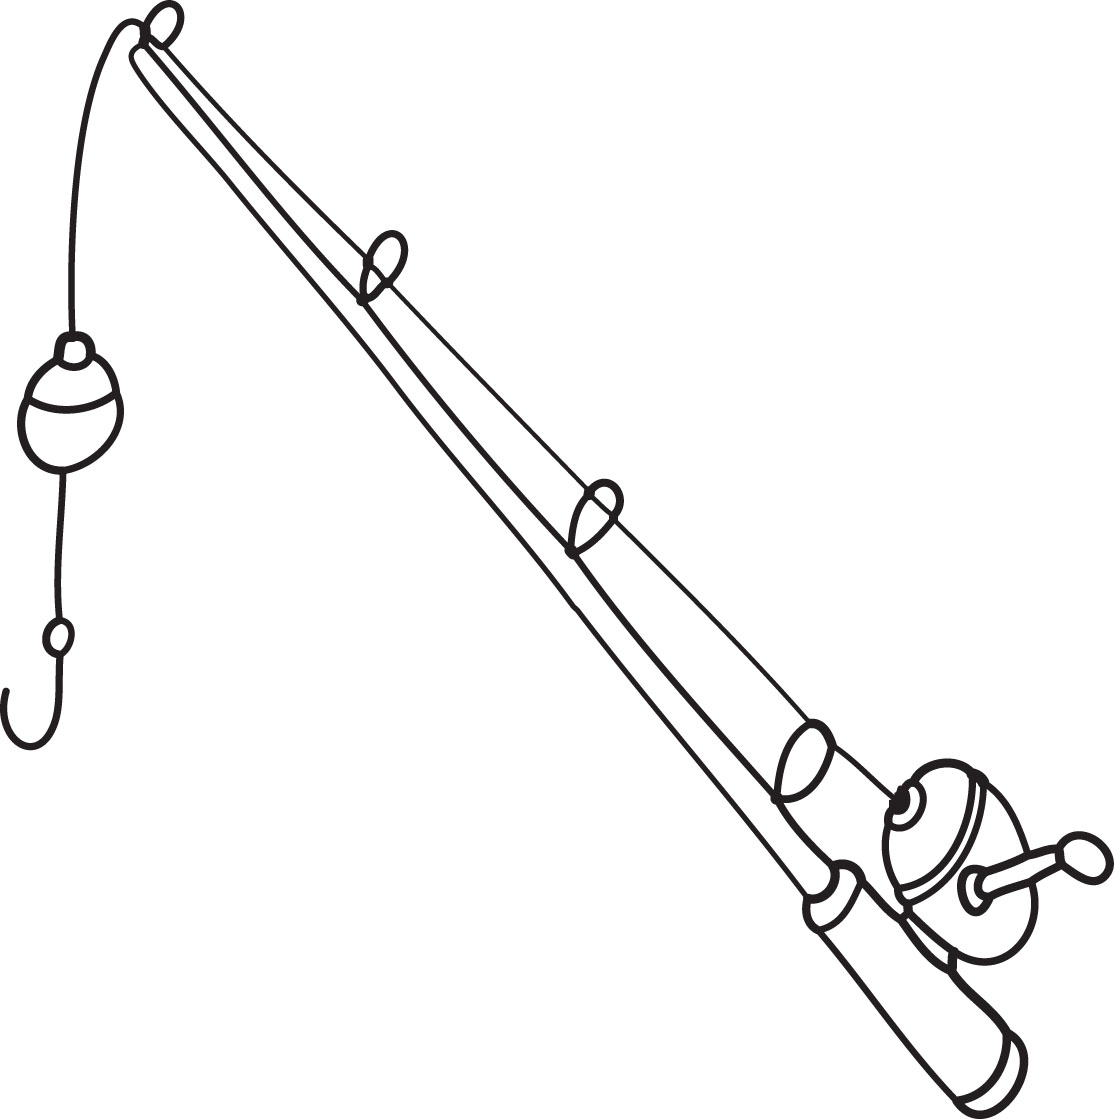 Fishing Rod Drawing - ClipArt Best